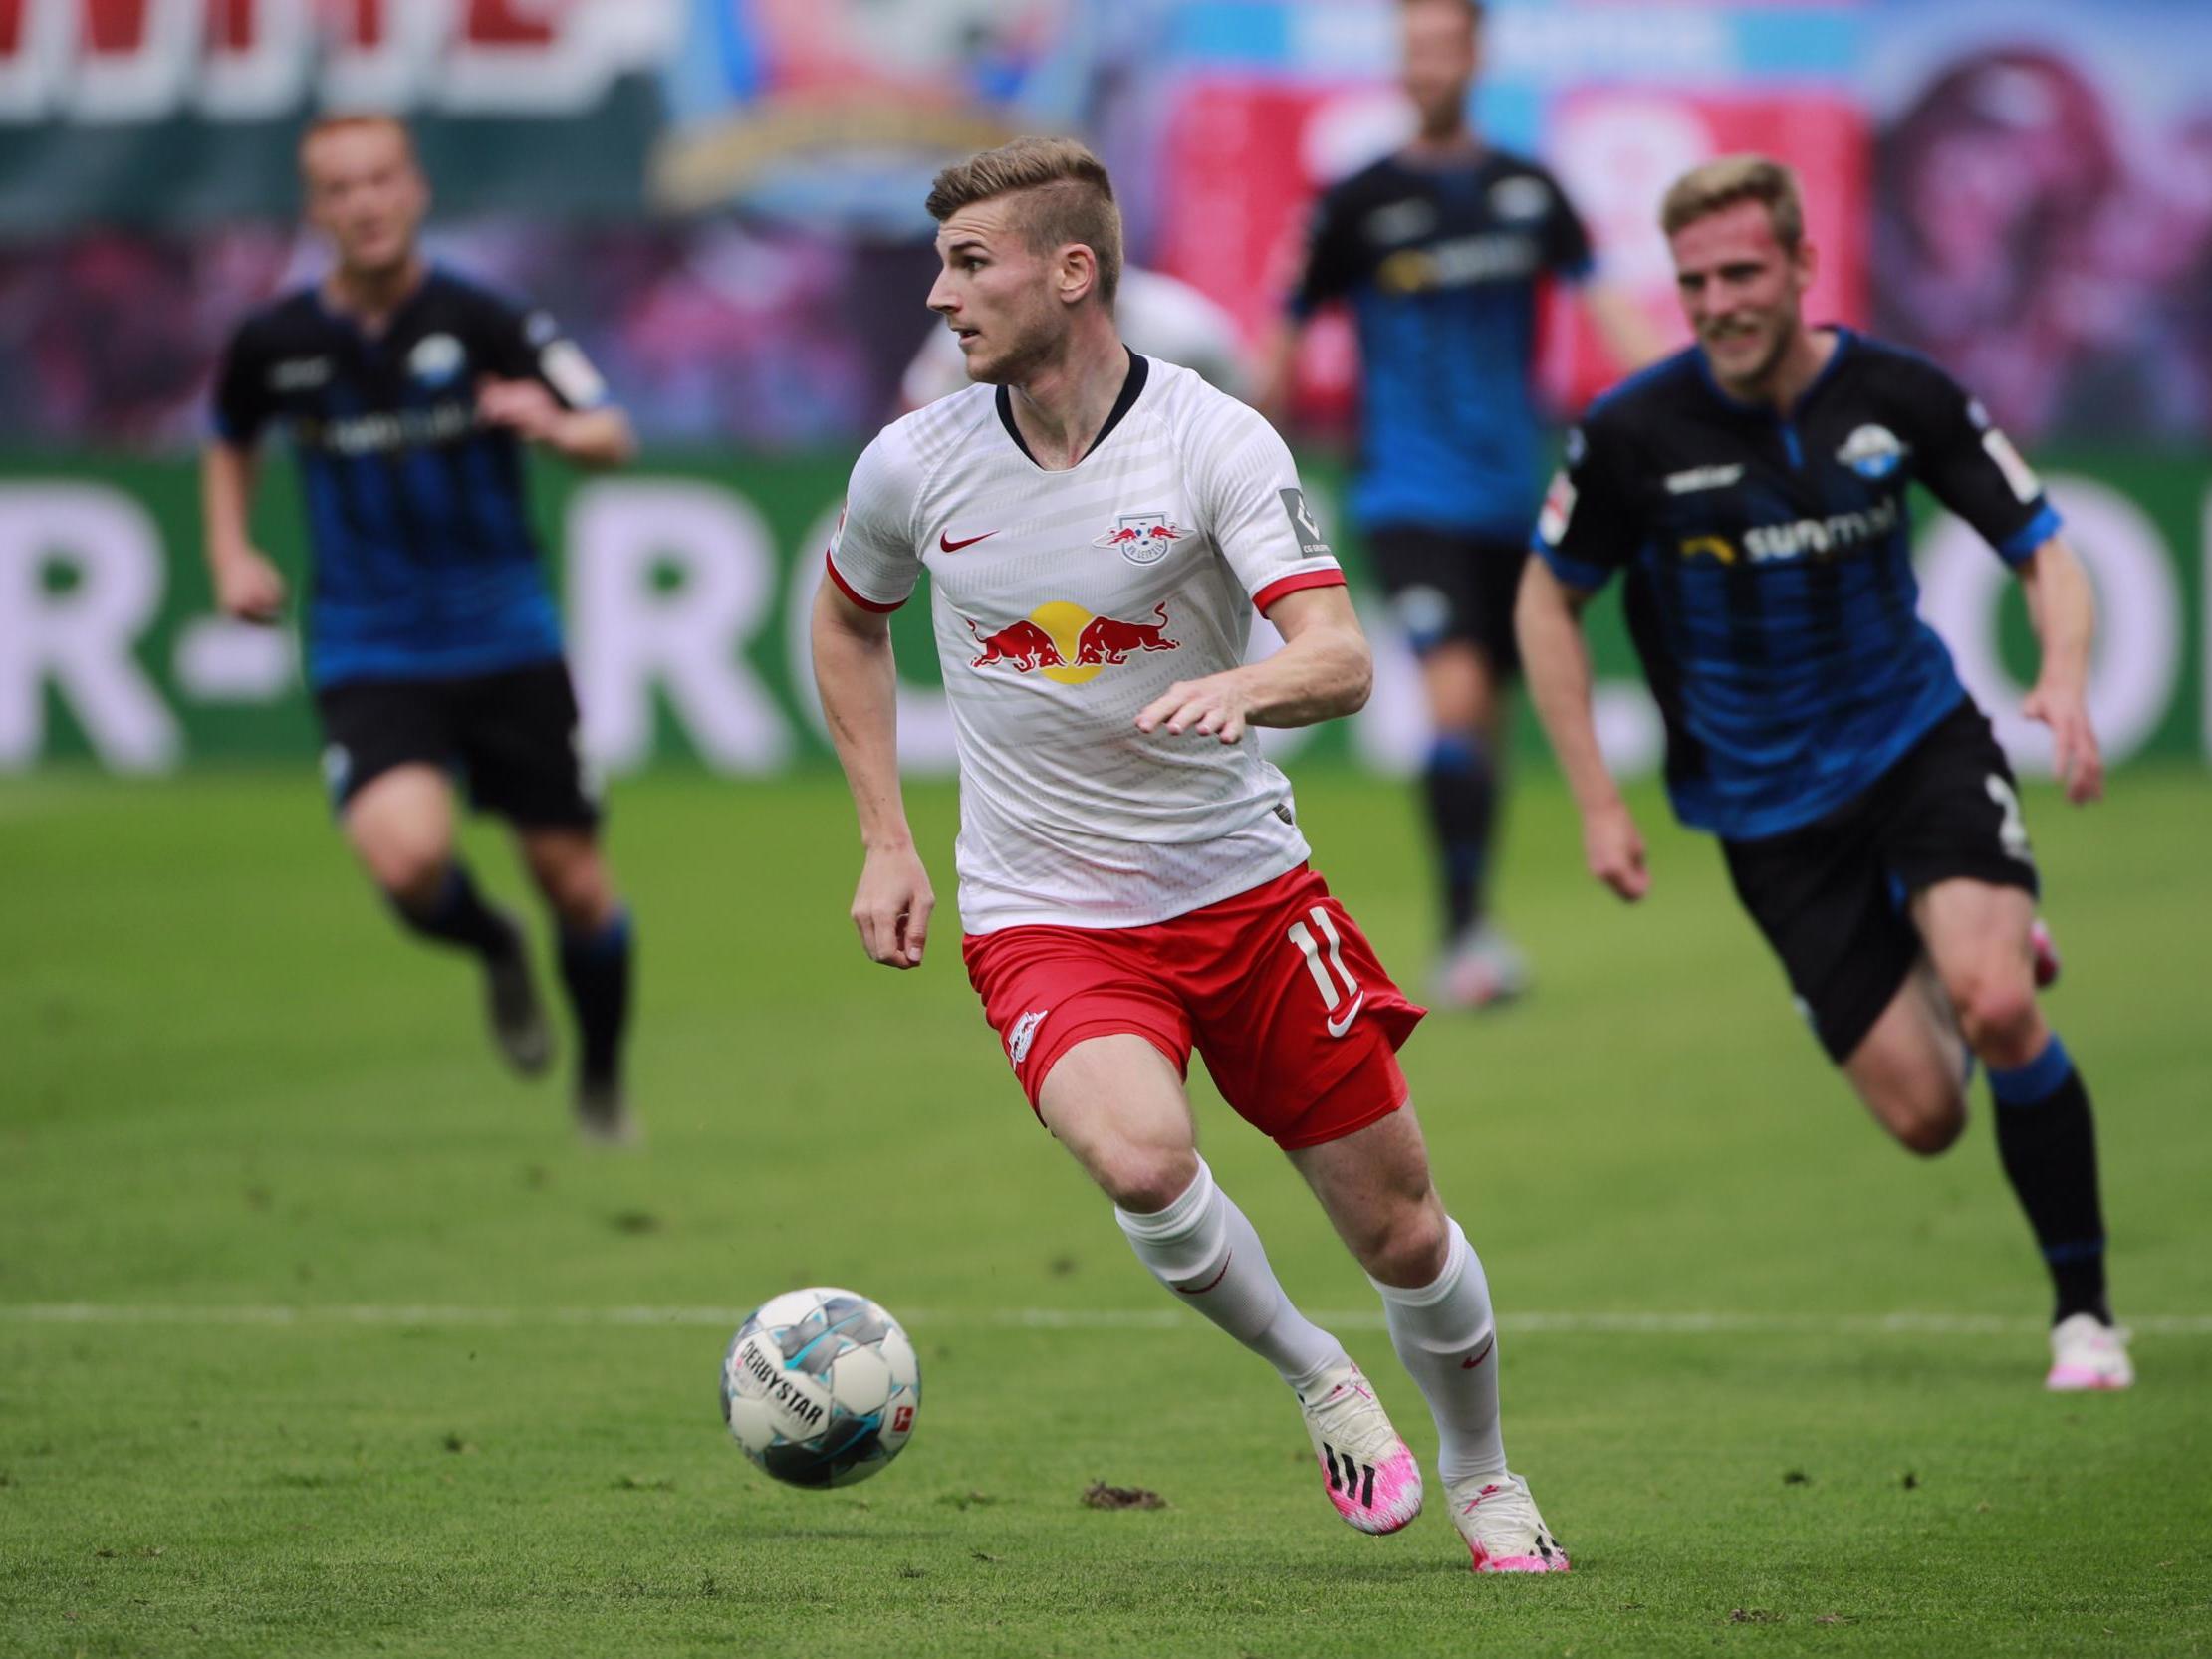 Werner will arrive at the end of the Bundesliga season